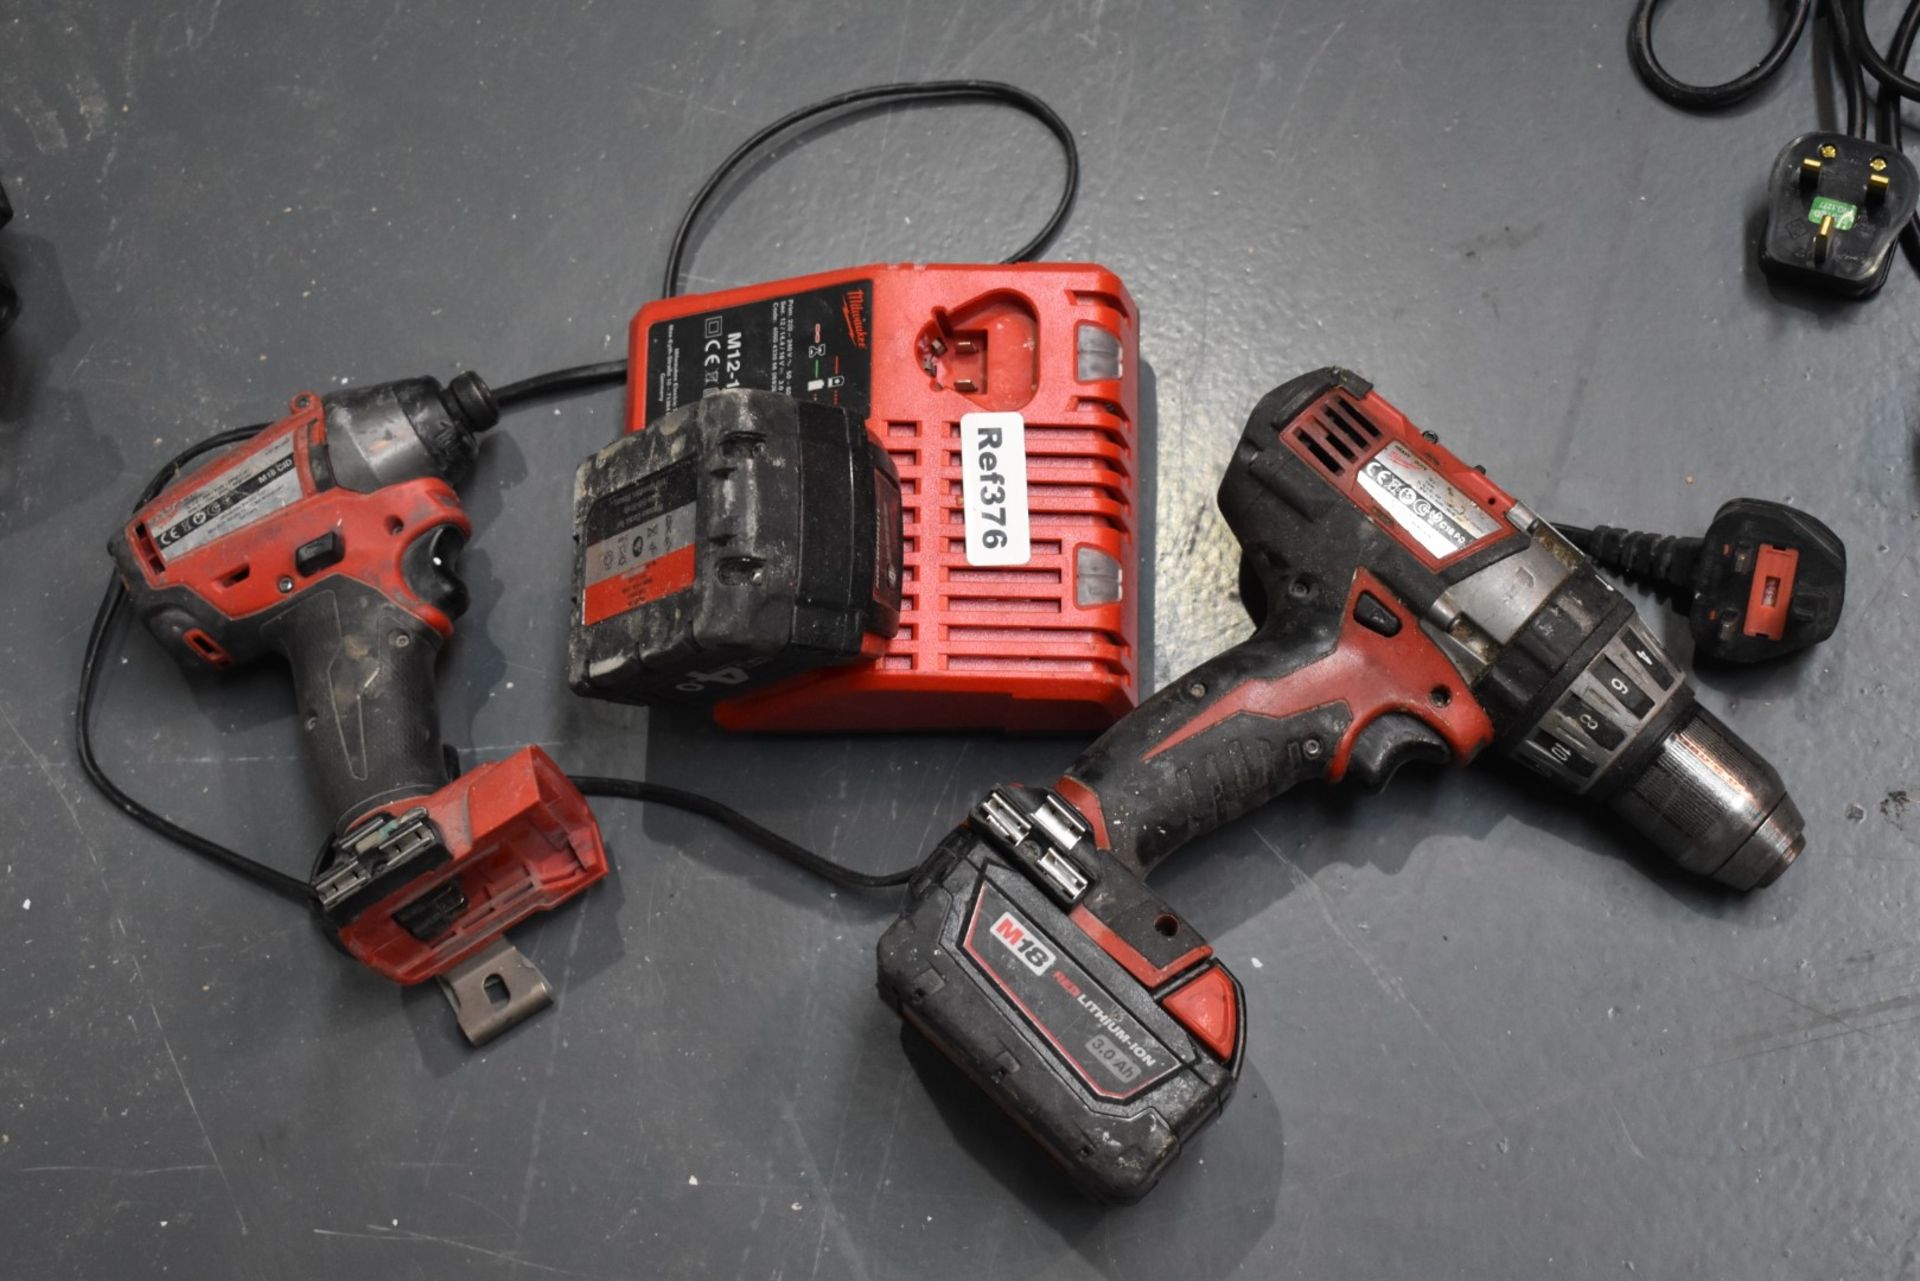 1 x Milwaukee Cordless Heavy Duty Drill Set - Includes 2 x Drills, 2 x Batteries and 1 x Charger - - Image 2 of 7